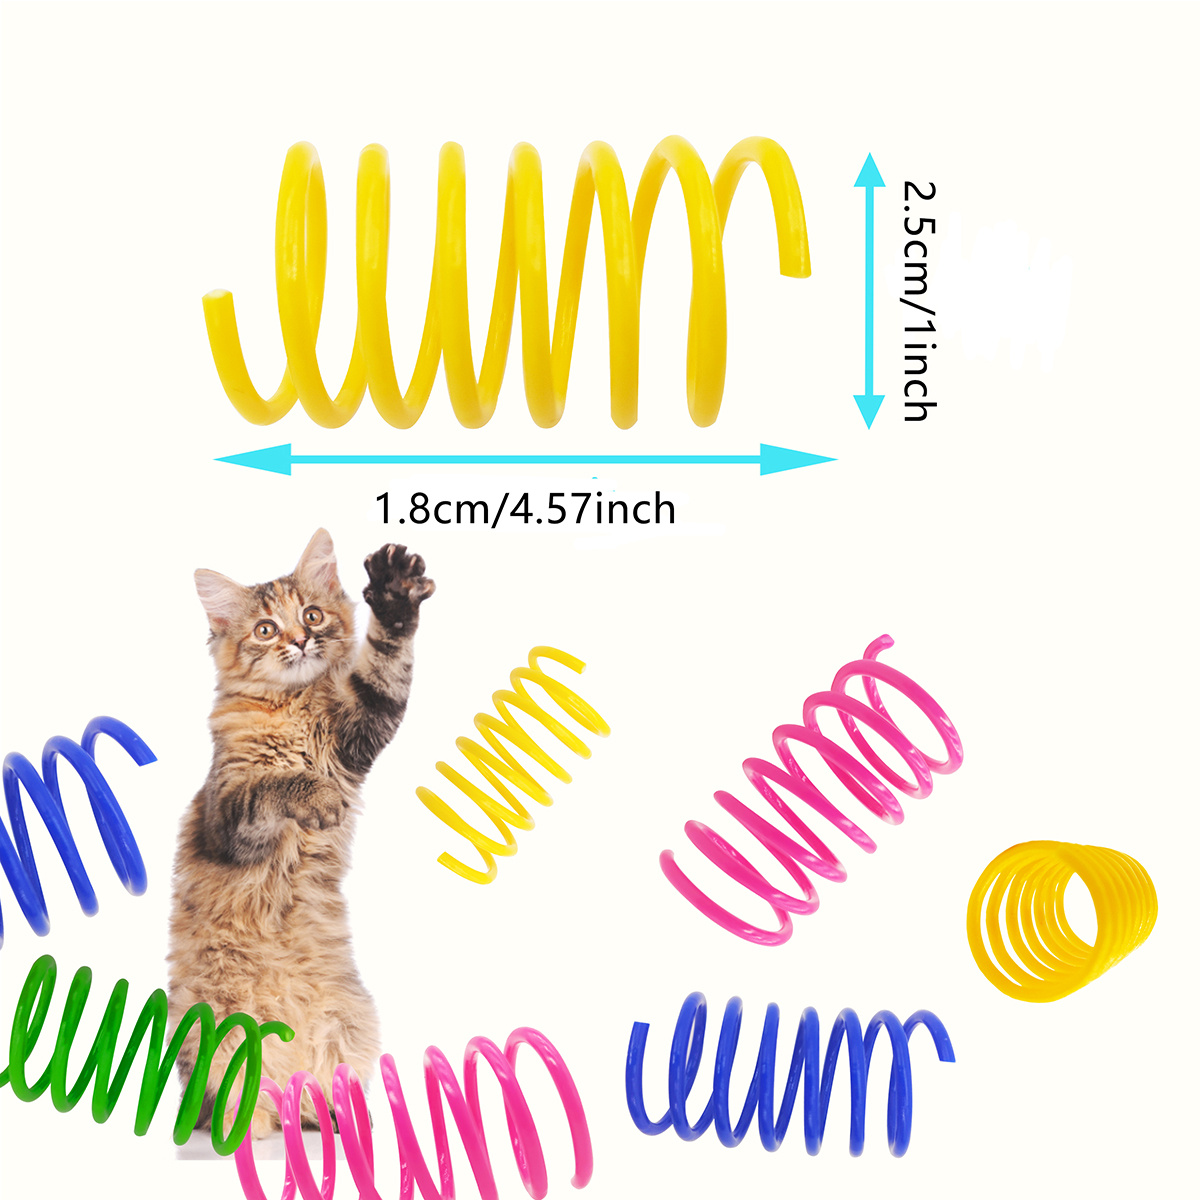 

30pcs Cat Color Plastic Spiral Springs Jumping And Playing With Cat Interactive Fun Toys Cat Self Hi Toys Pet Supplies Combination Set Durable And Playful Pet Daily Fun